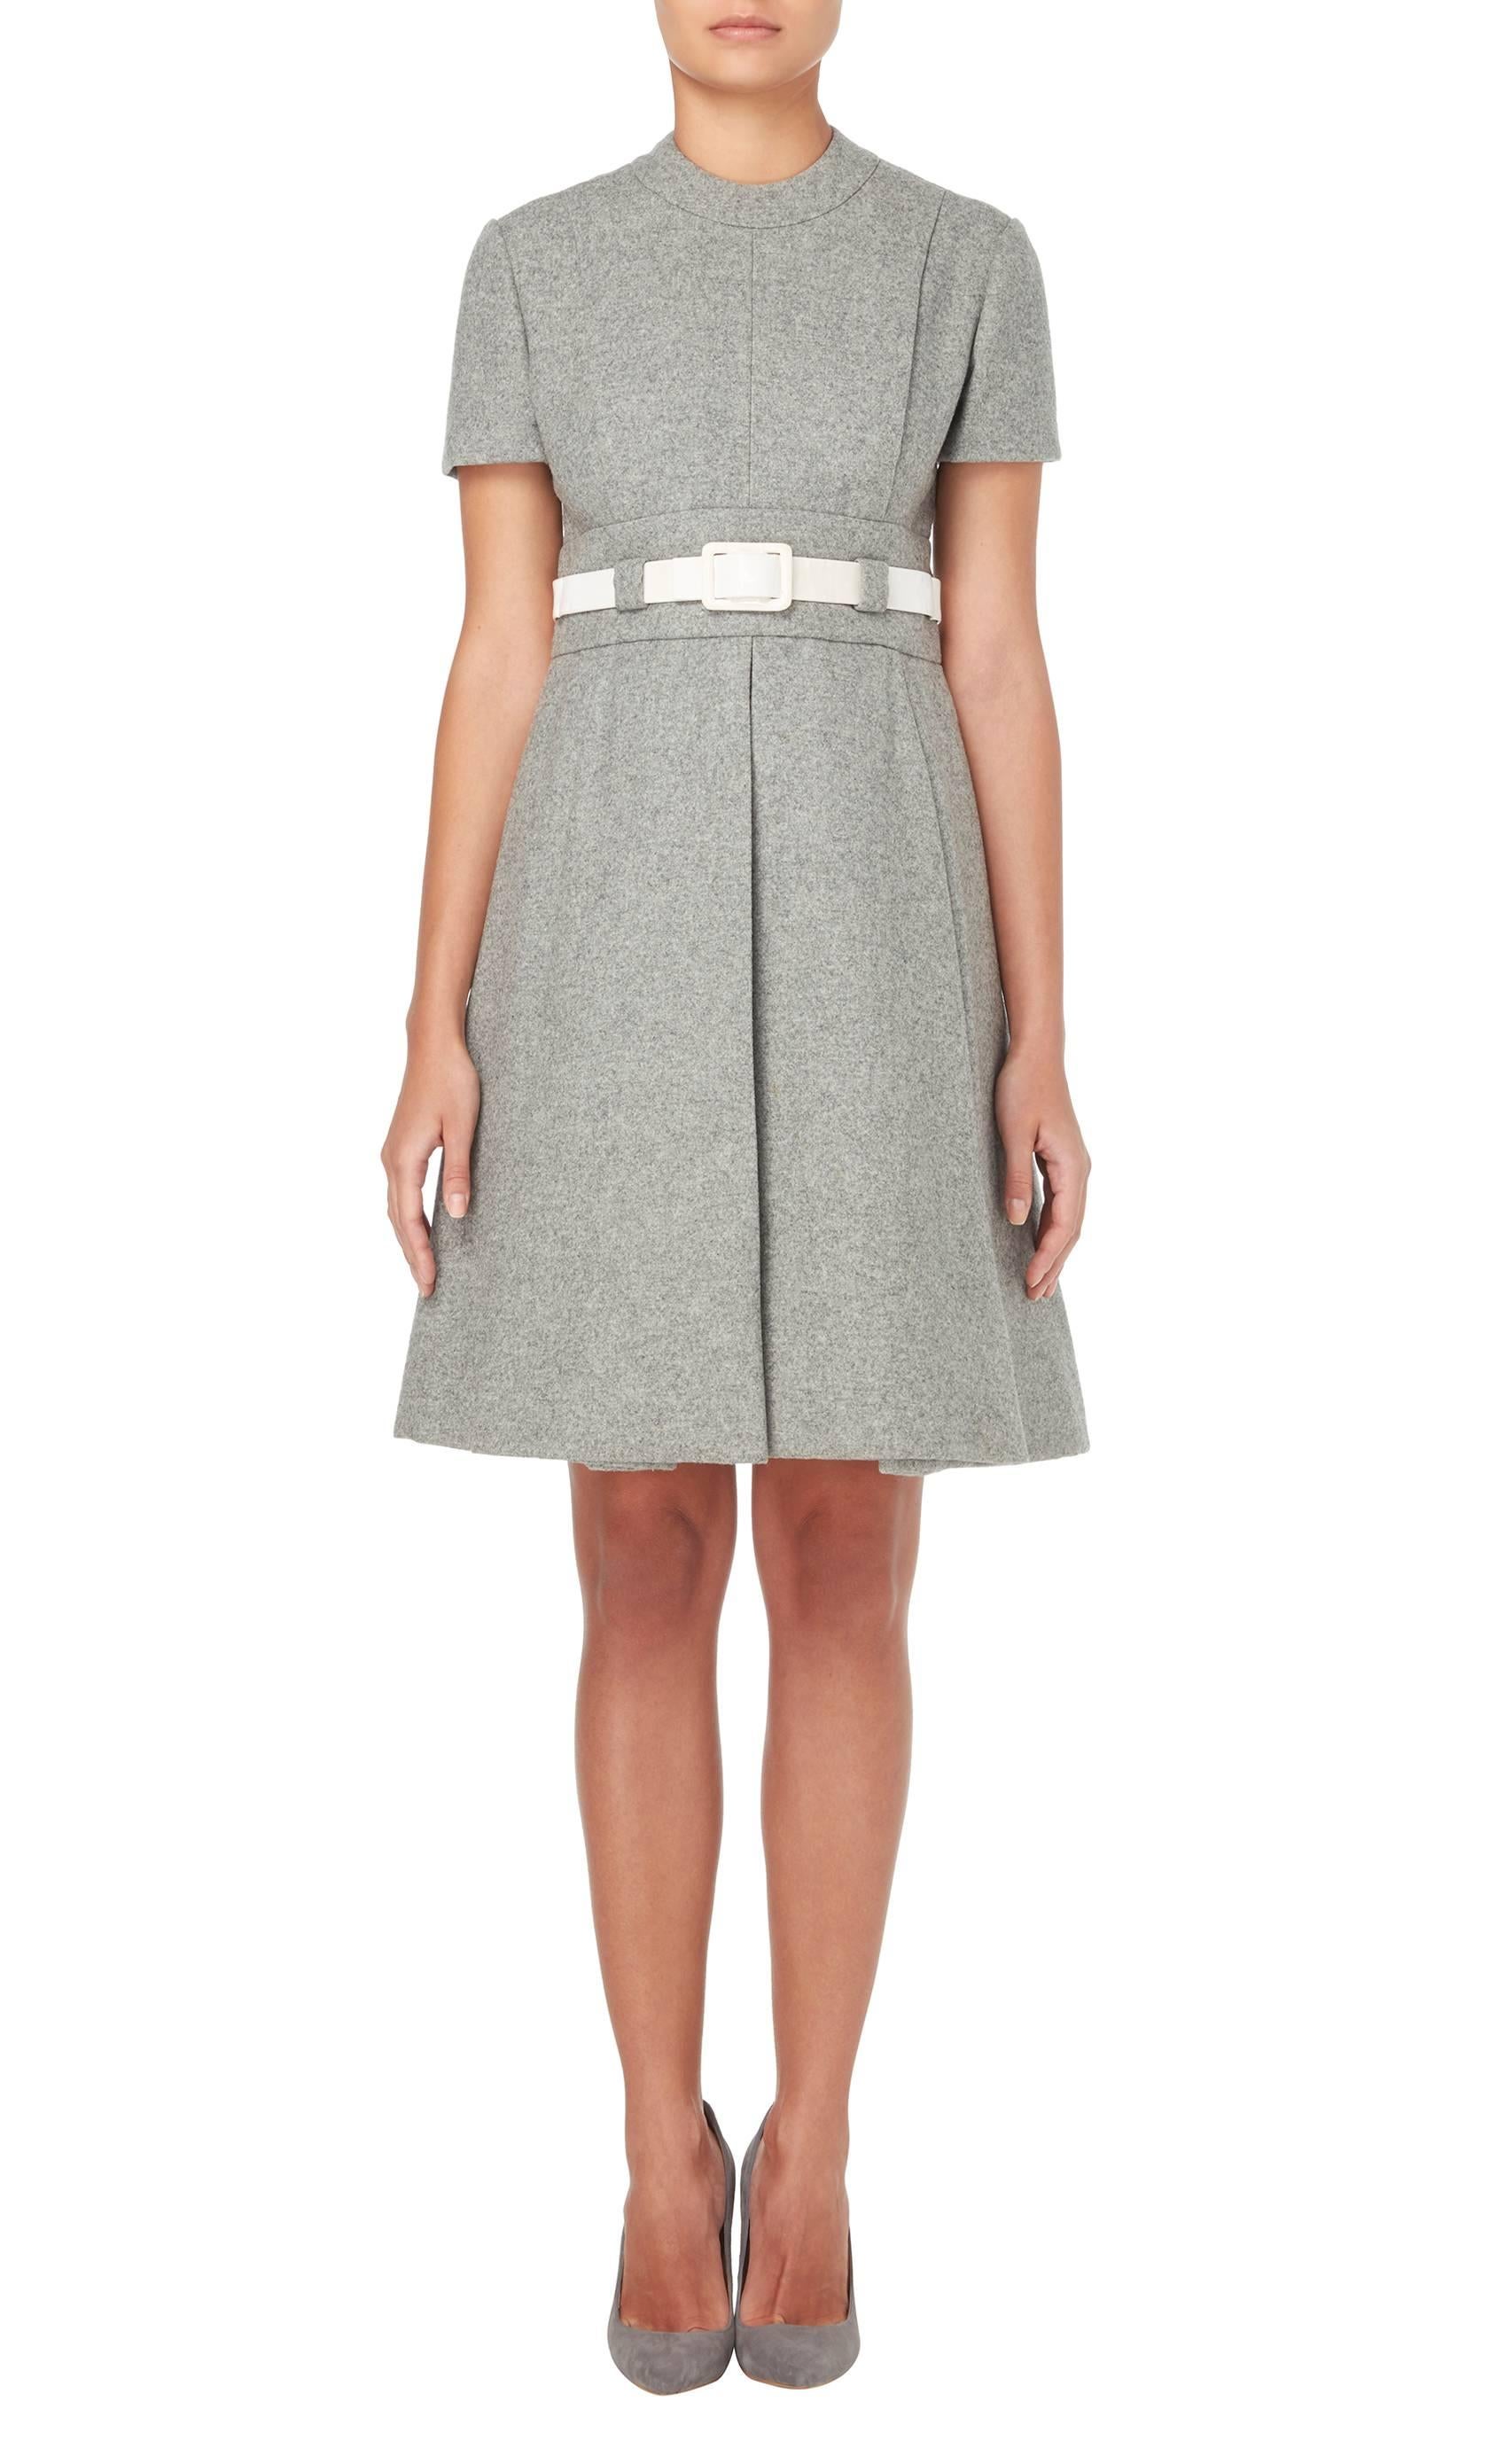 Constructed in grey wool-felt
Featuring a white vinyl belt and box pleated skirt
Zip fastening to rear
Excellent condition with the original label, lining and fastenings
Professionally dry cleaned and ozone-treated
Inspected by a couture-trained